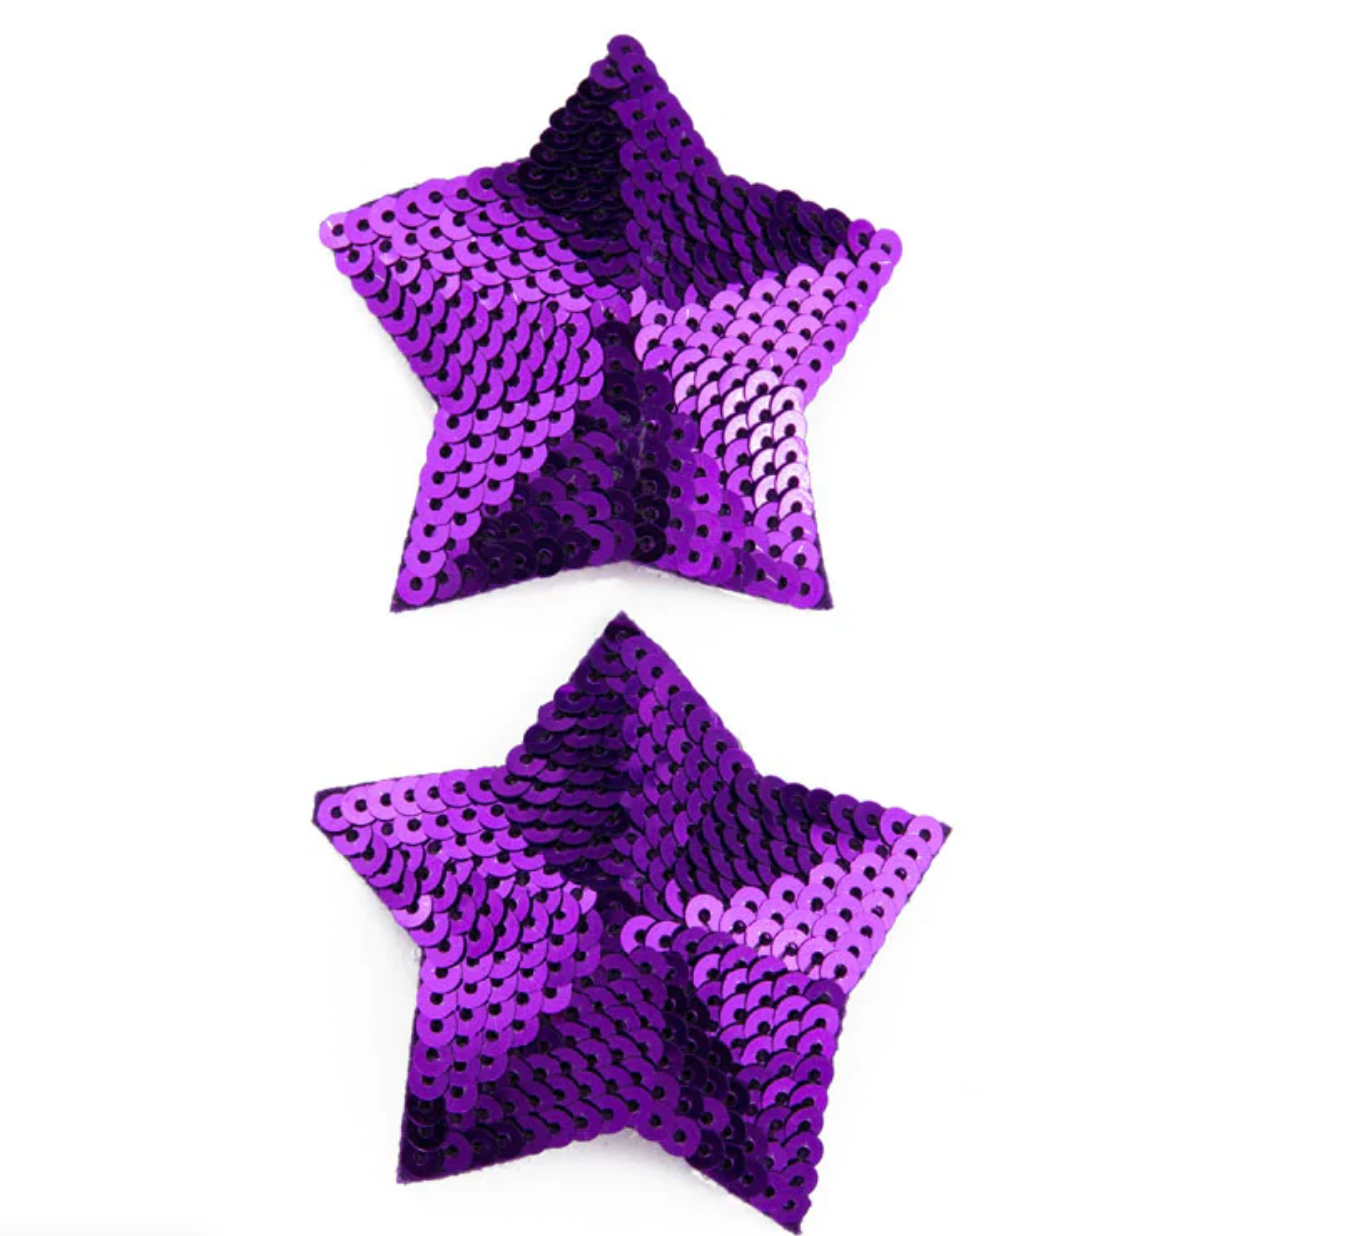 STARLIGHT BUNDLE 2 Pairs of Star Nipple Pasties, Cover (4pcs) for Burlesque, Lingerie Raves and Festivals